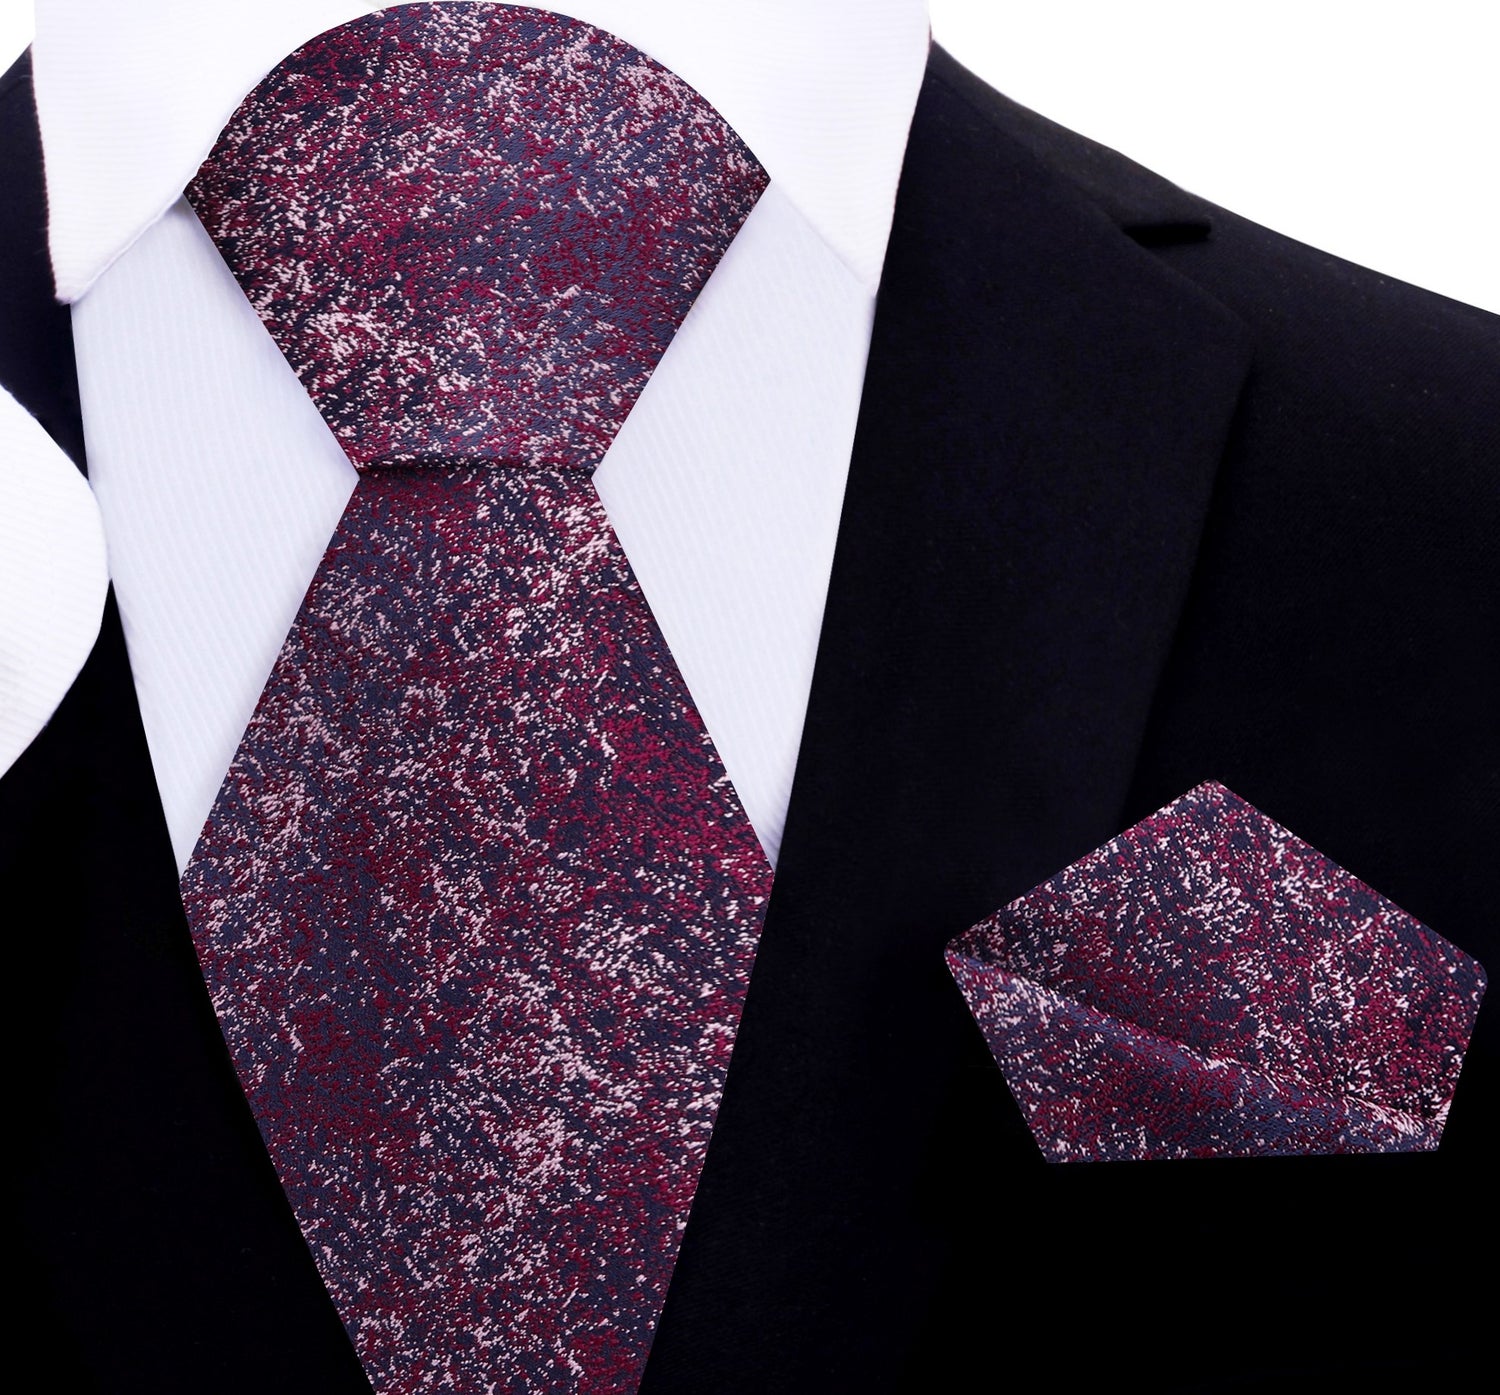 A Fury Red, Peach Sand, Midnight Blue Color Textured Pattern Silk Tie, Pocket Square